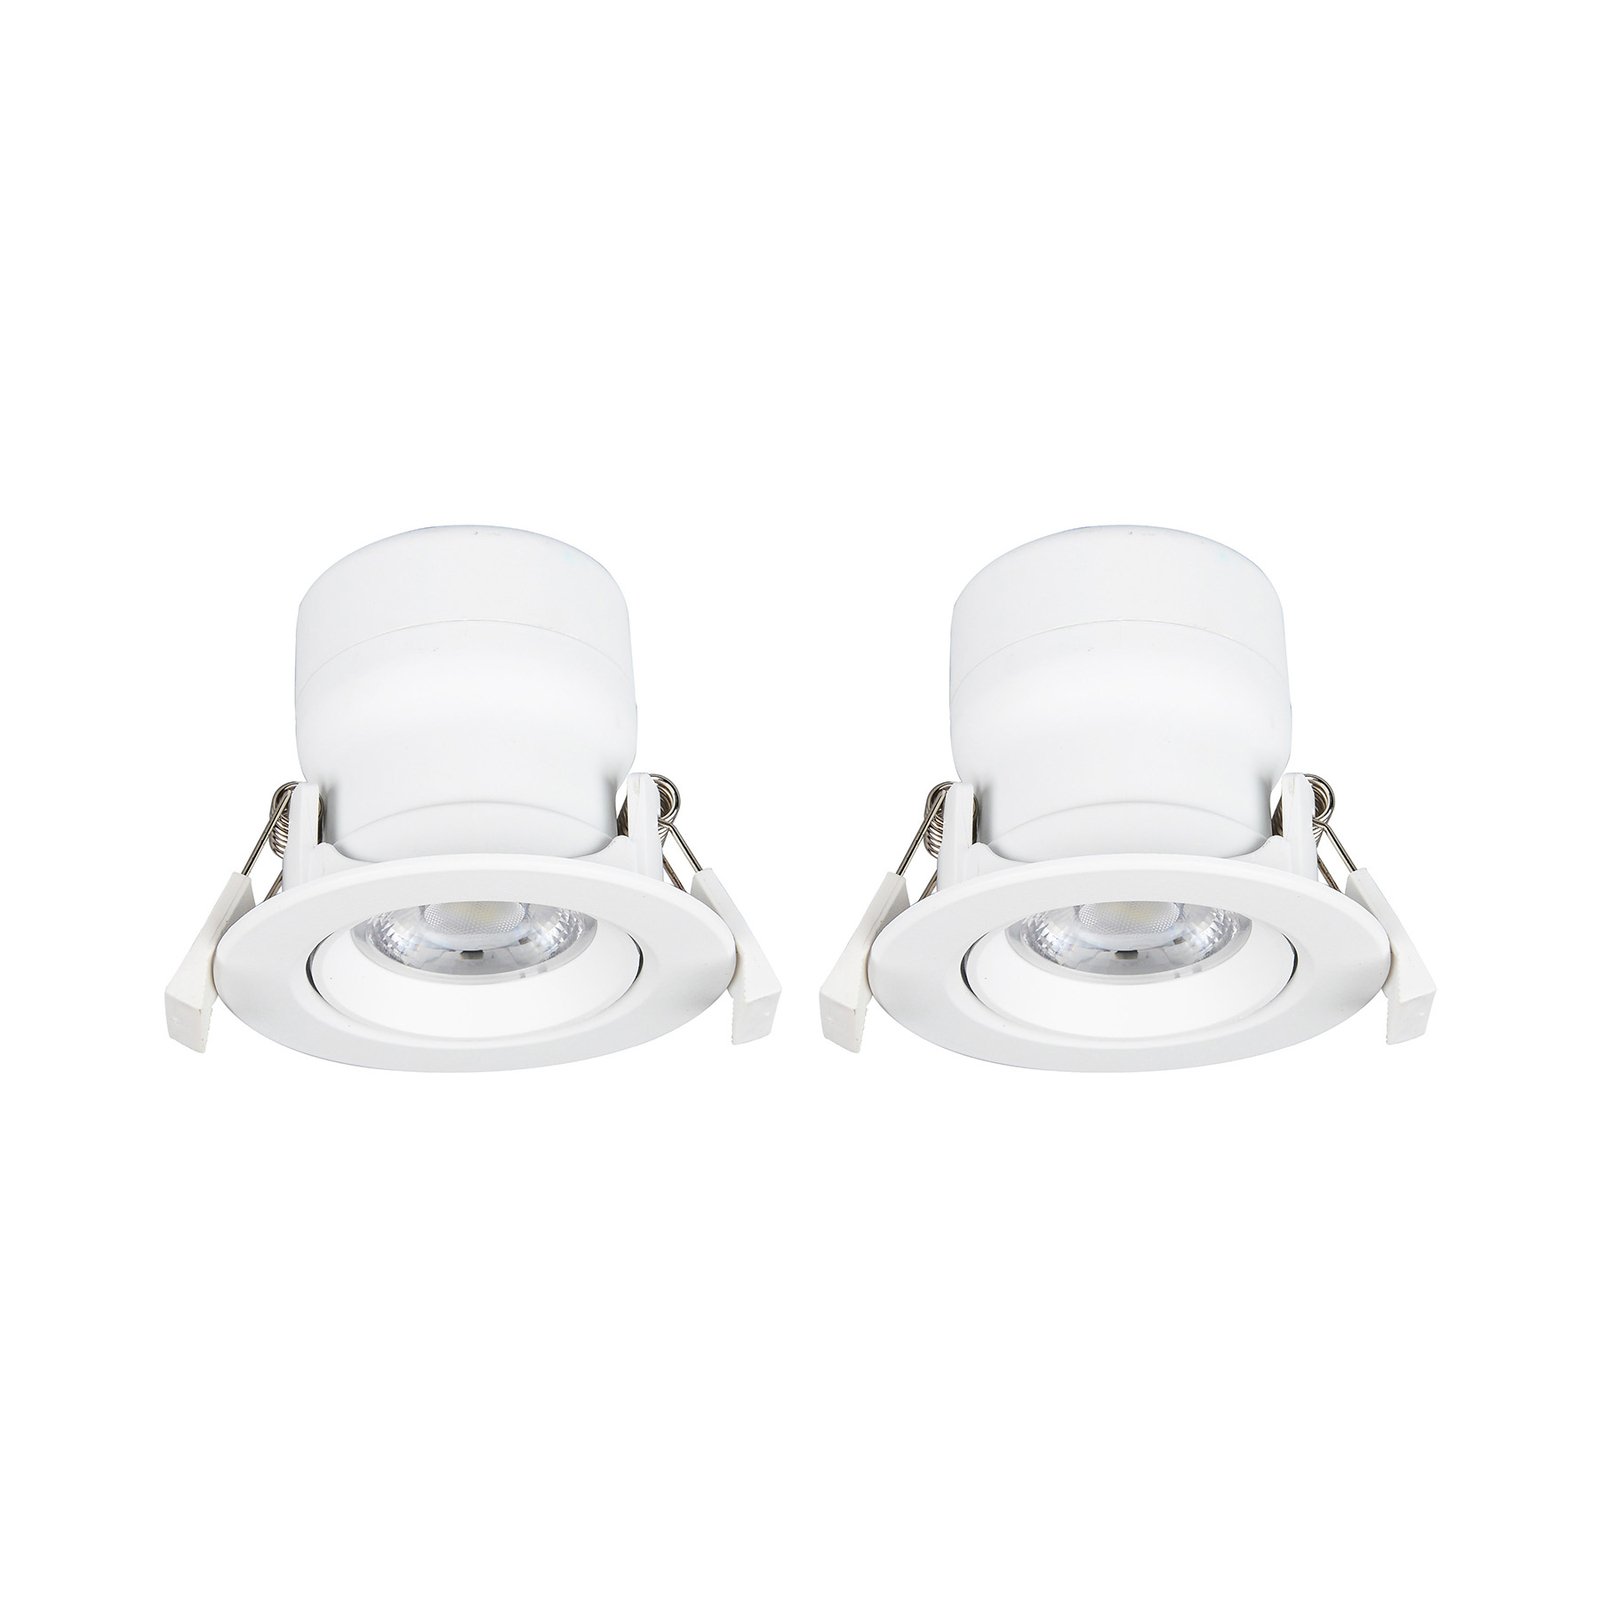 Prios LED recessed light Shima, white, 7W, 3000K, 2pcs, dimmable